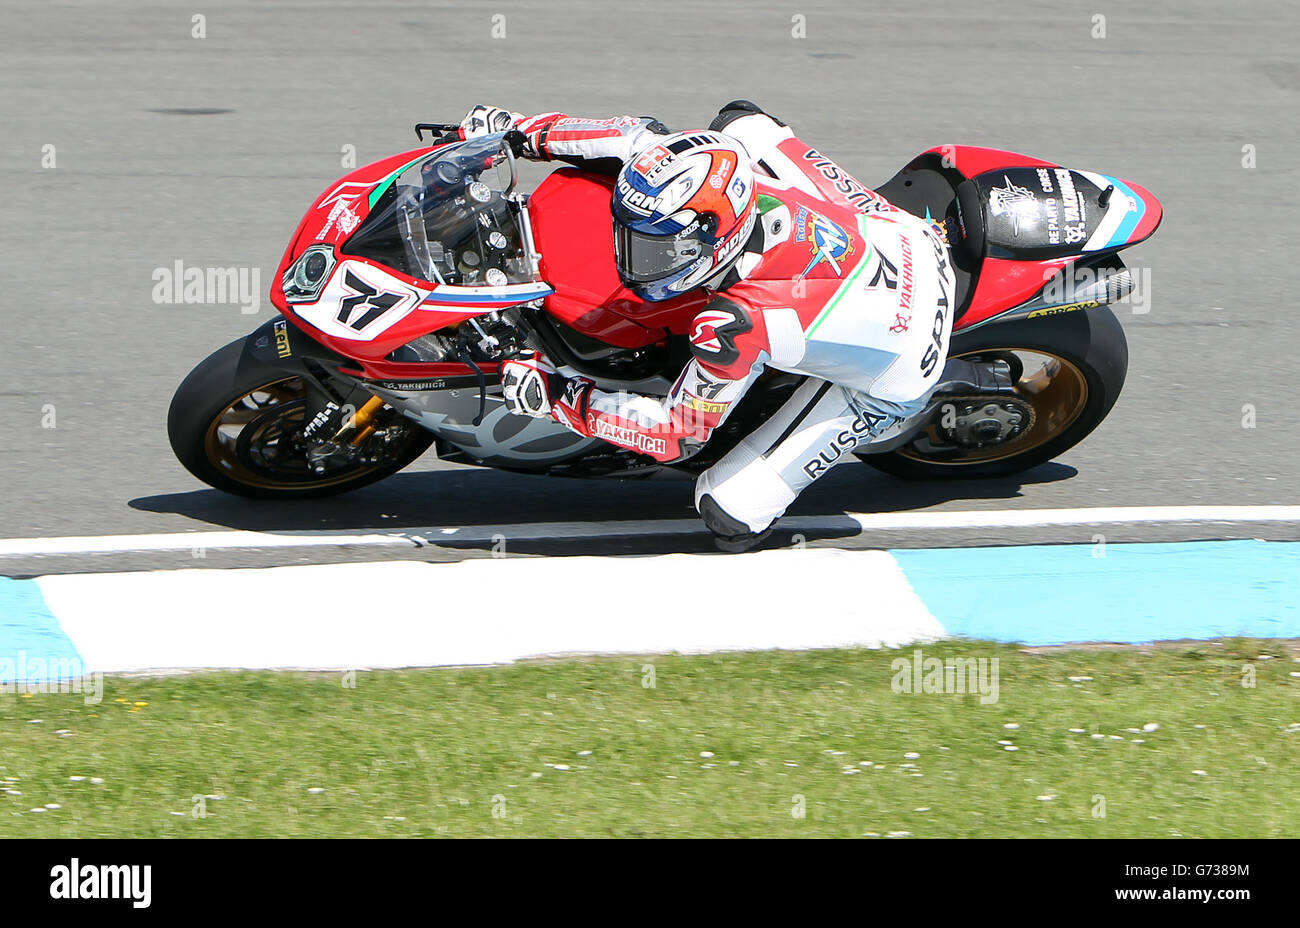 Motor Racing - Superbike FIM World Championship - Round Five - Race Day - Donington Park. MV Agusta FA RR's Claudio Corti during race two of round 5 of the Superbikes FIM World Championship at Donington Park, Donington. Stock Photo